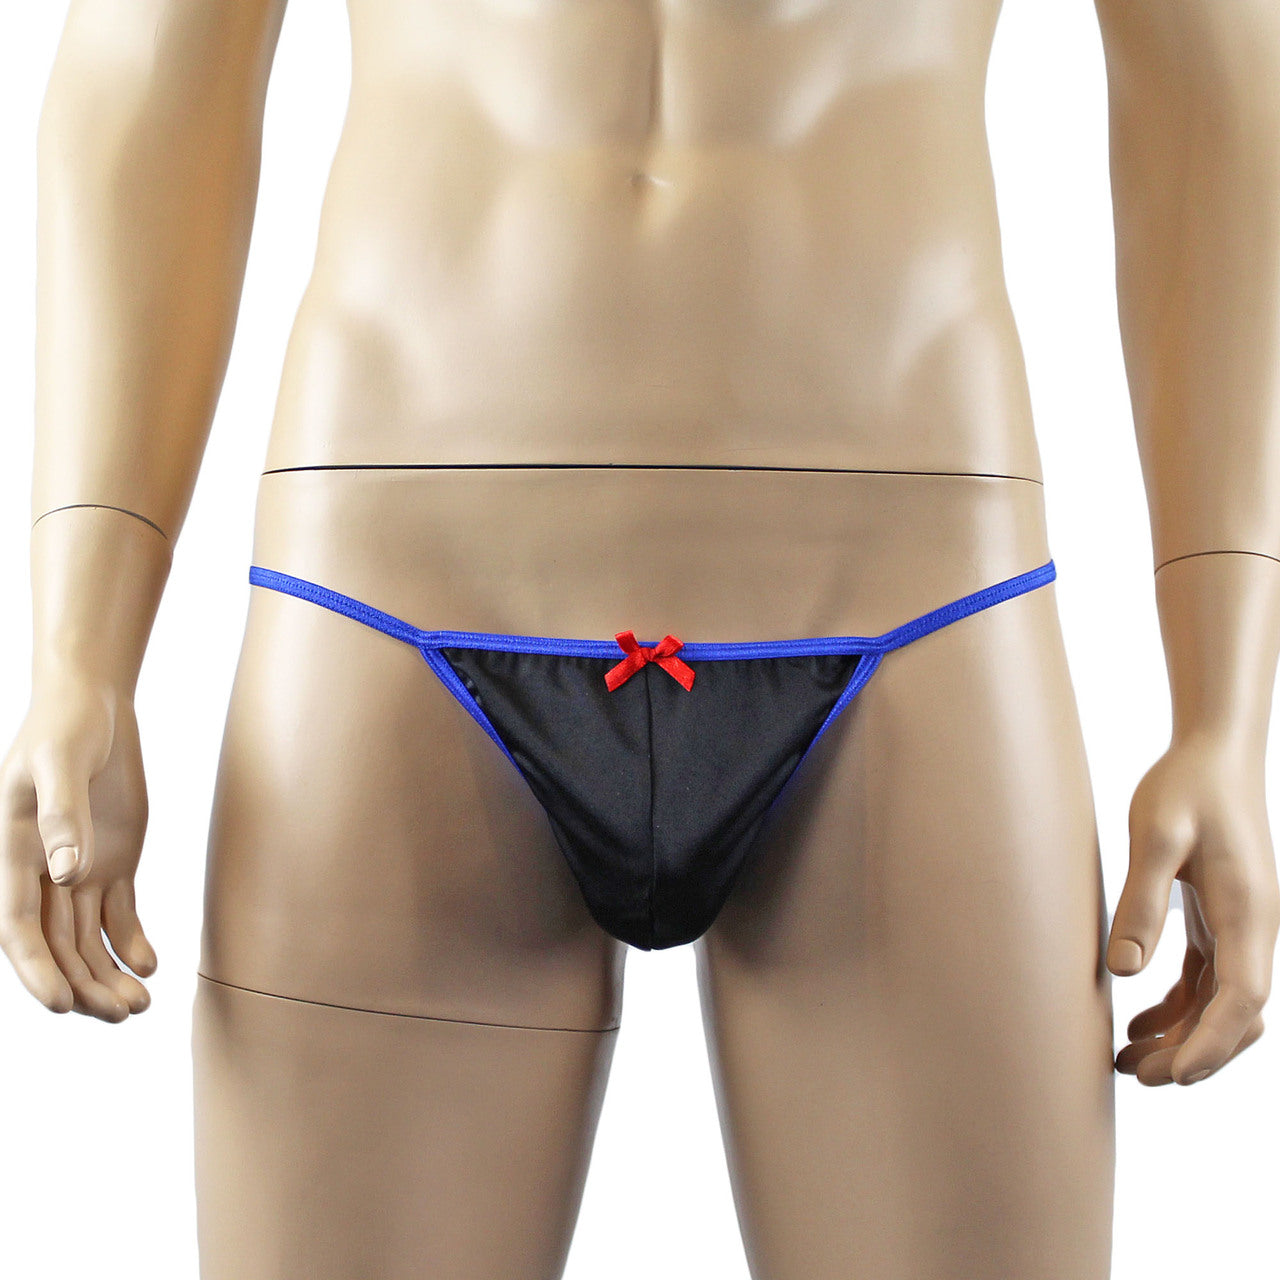 Mens Lingerie Colourful Stud G string with Bow Front (assorted colours)